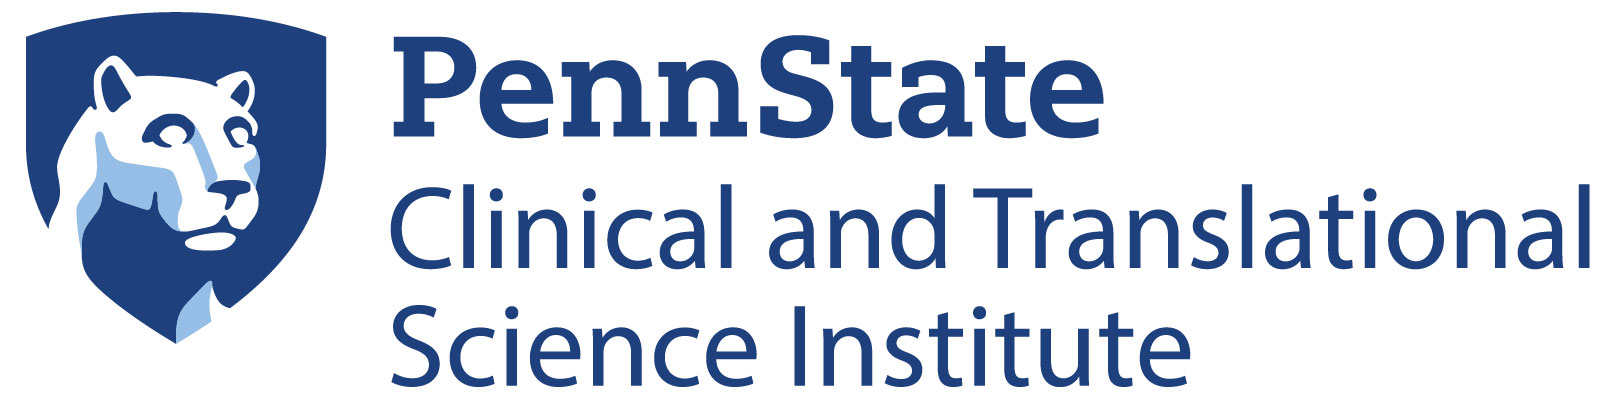 Home - Penn State Clinical and Translational Science Institute